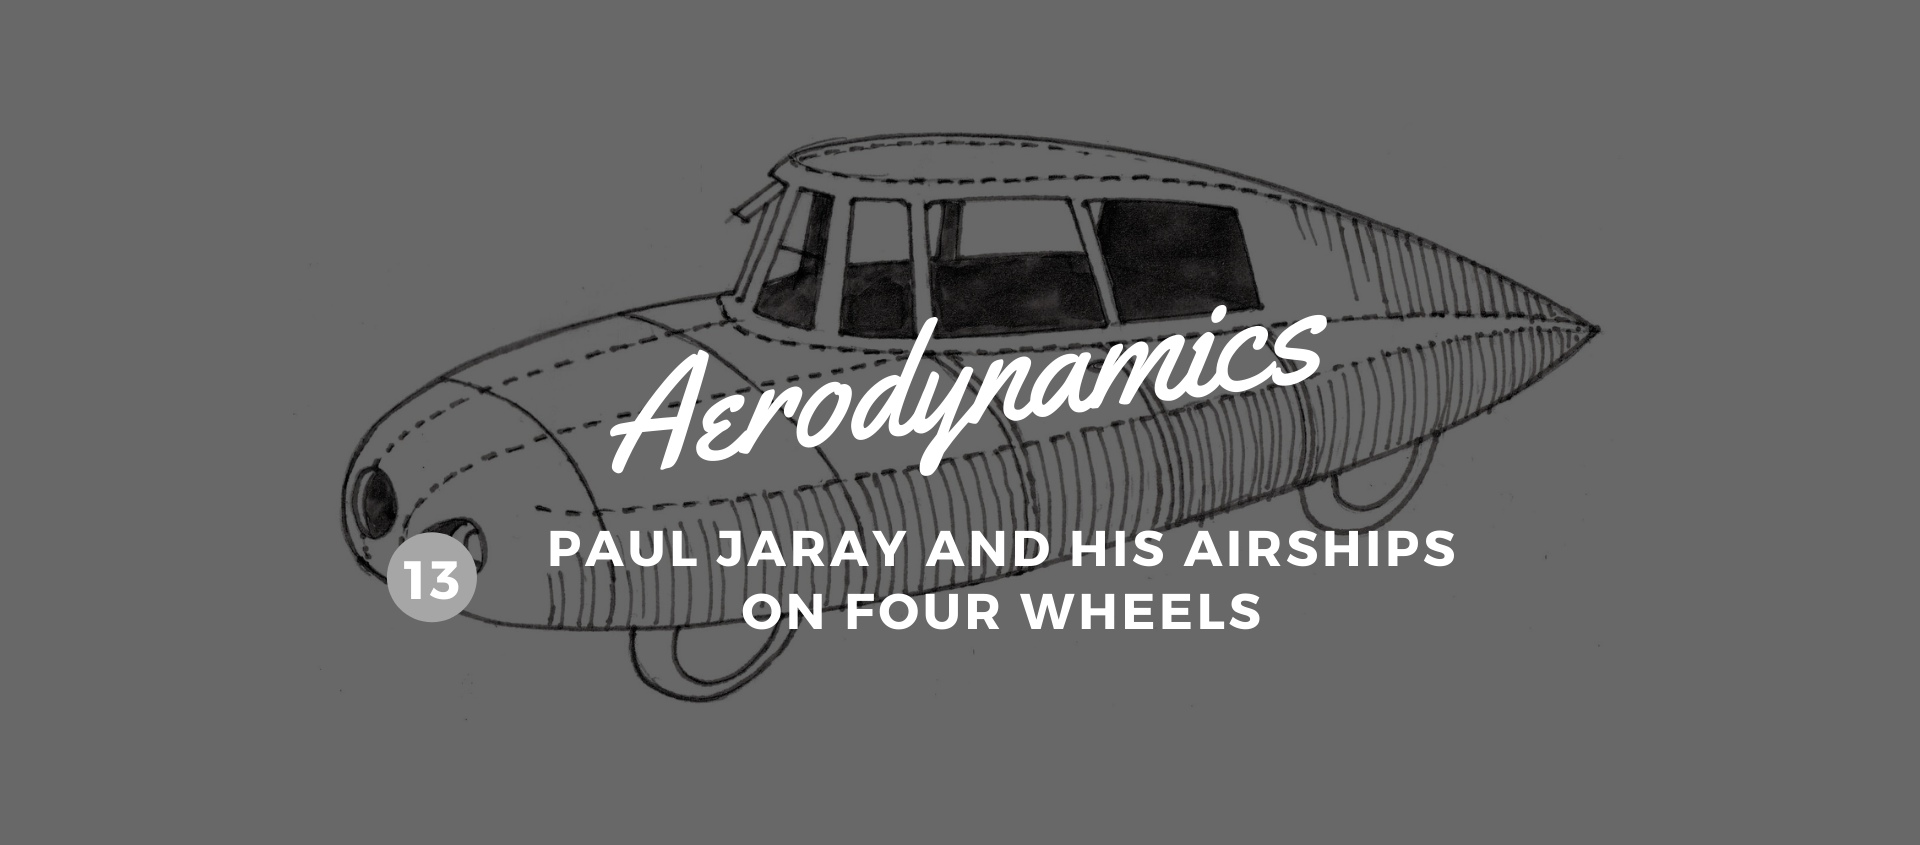 1921. Paul Jaray and his airships on four wheels image